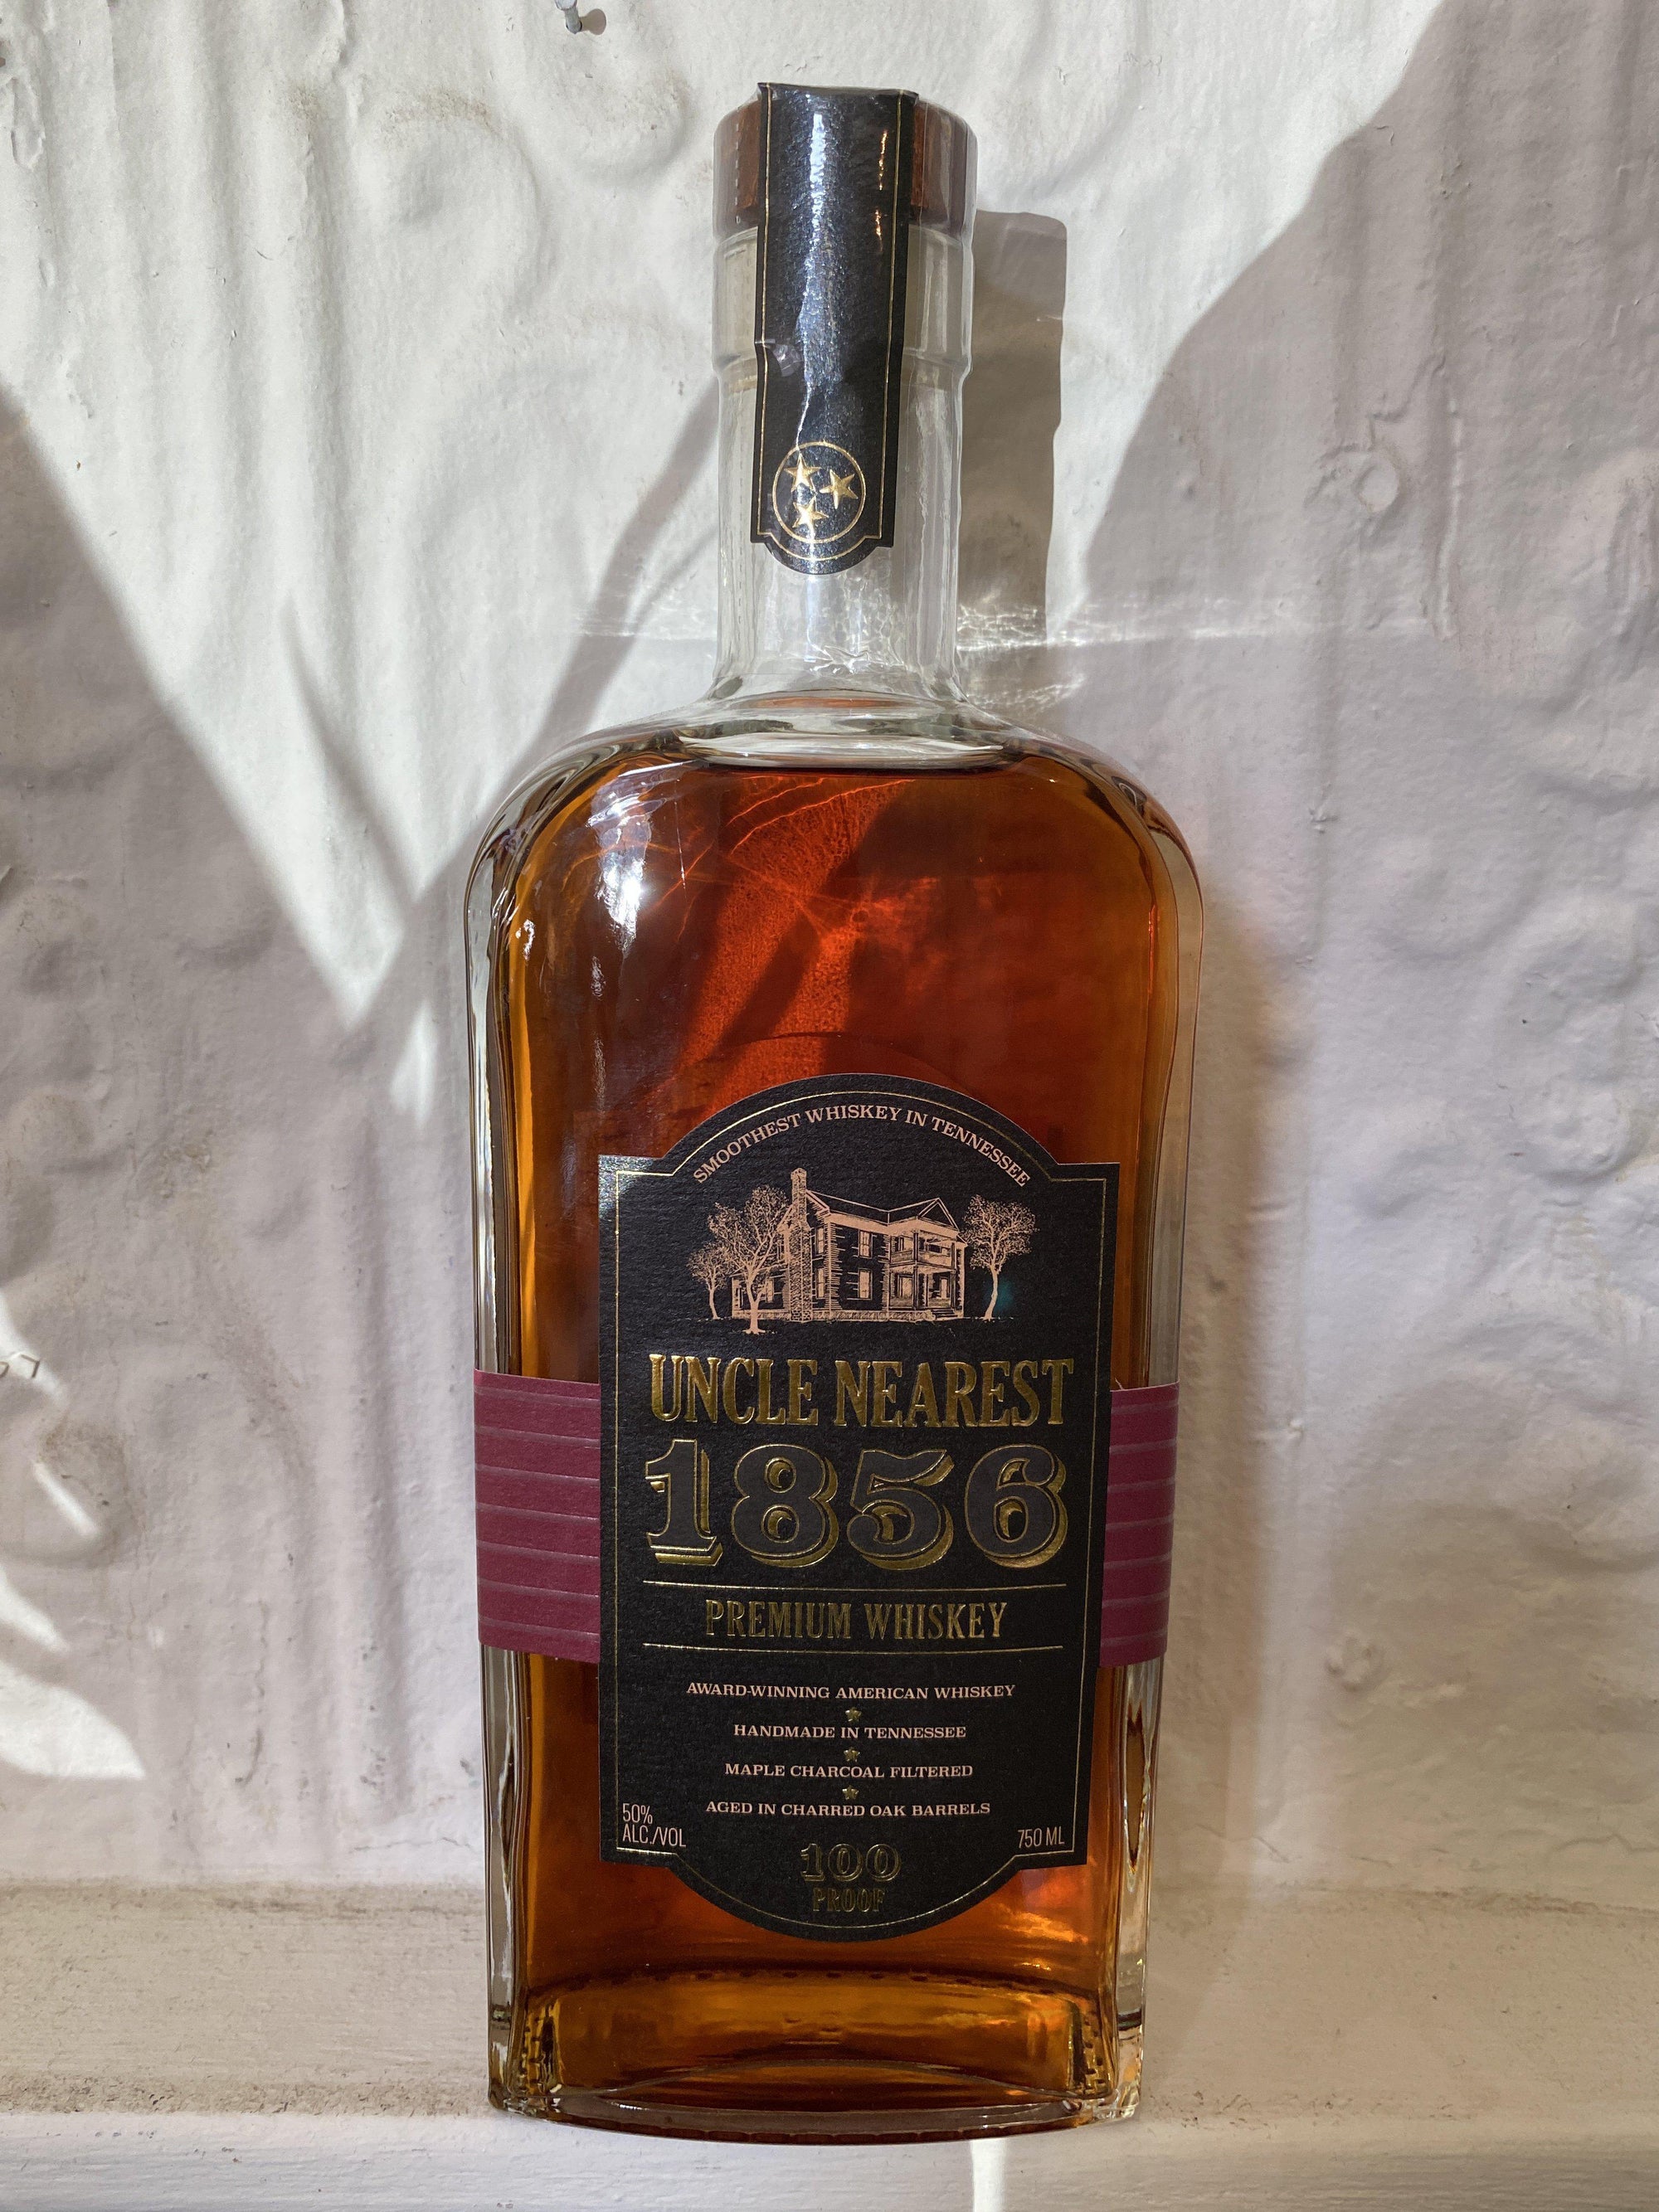 1856 Premium Tennessee Whiskey, Uncle Nearest (Tennessee, United States)-Spirits-Bibber & Bell